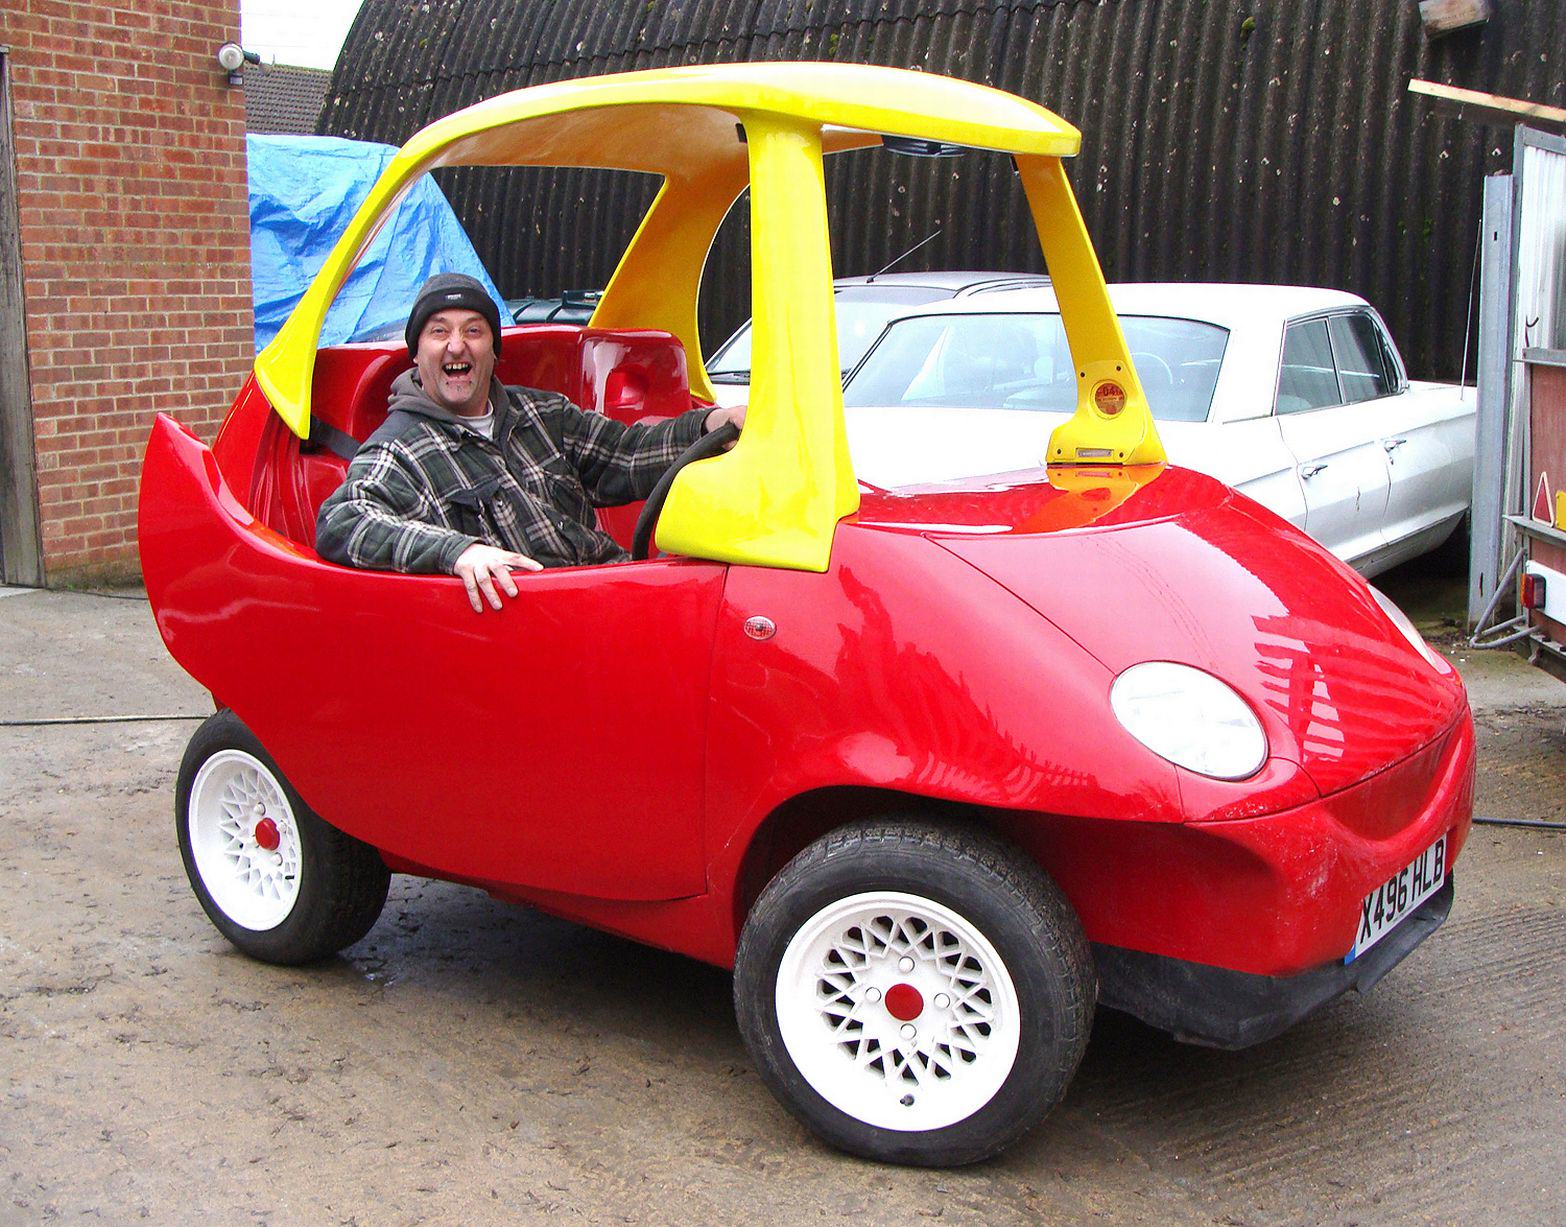 A Roadworthy Version Of Your Favourite Childhood Toy Car Is Now For Sale